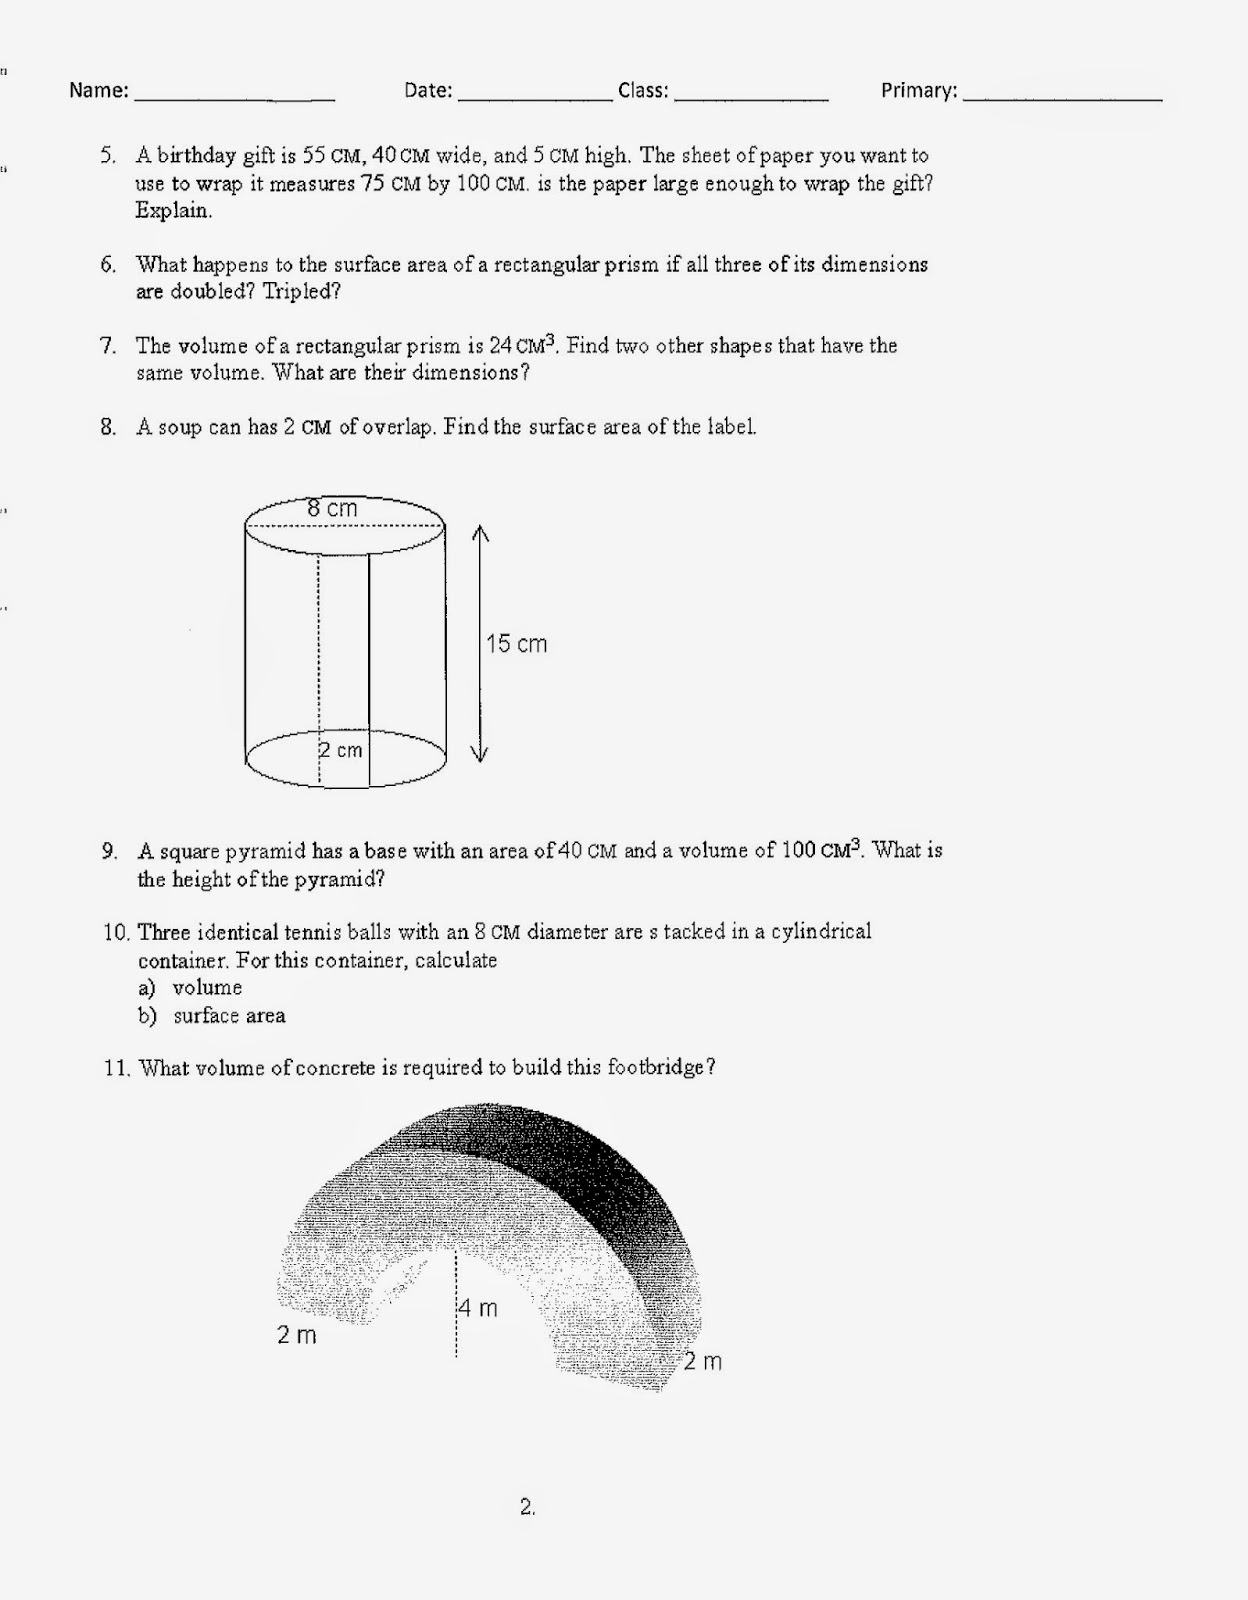 geometry-101-volume-and-surface-area-word-problems